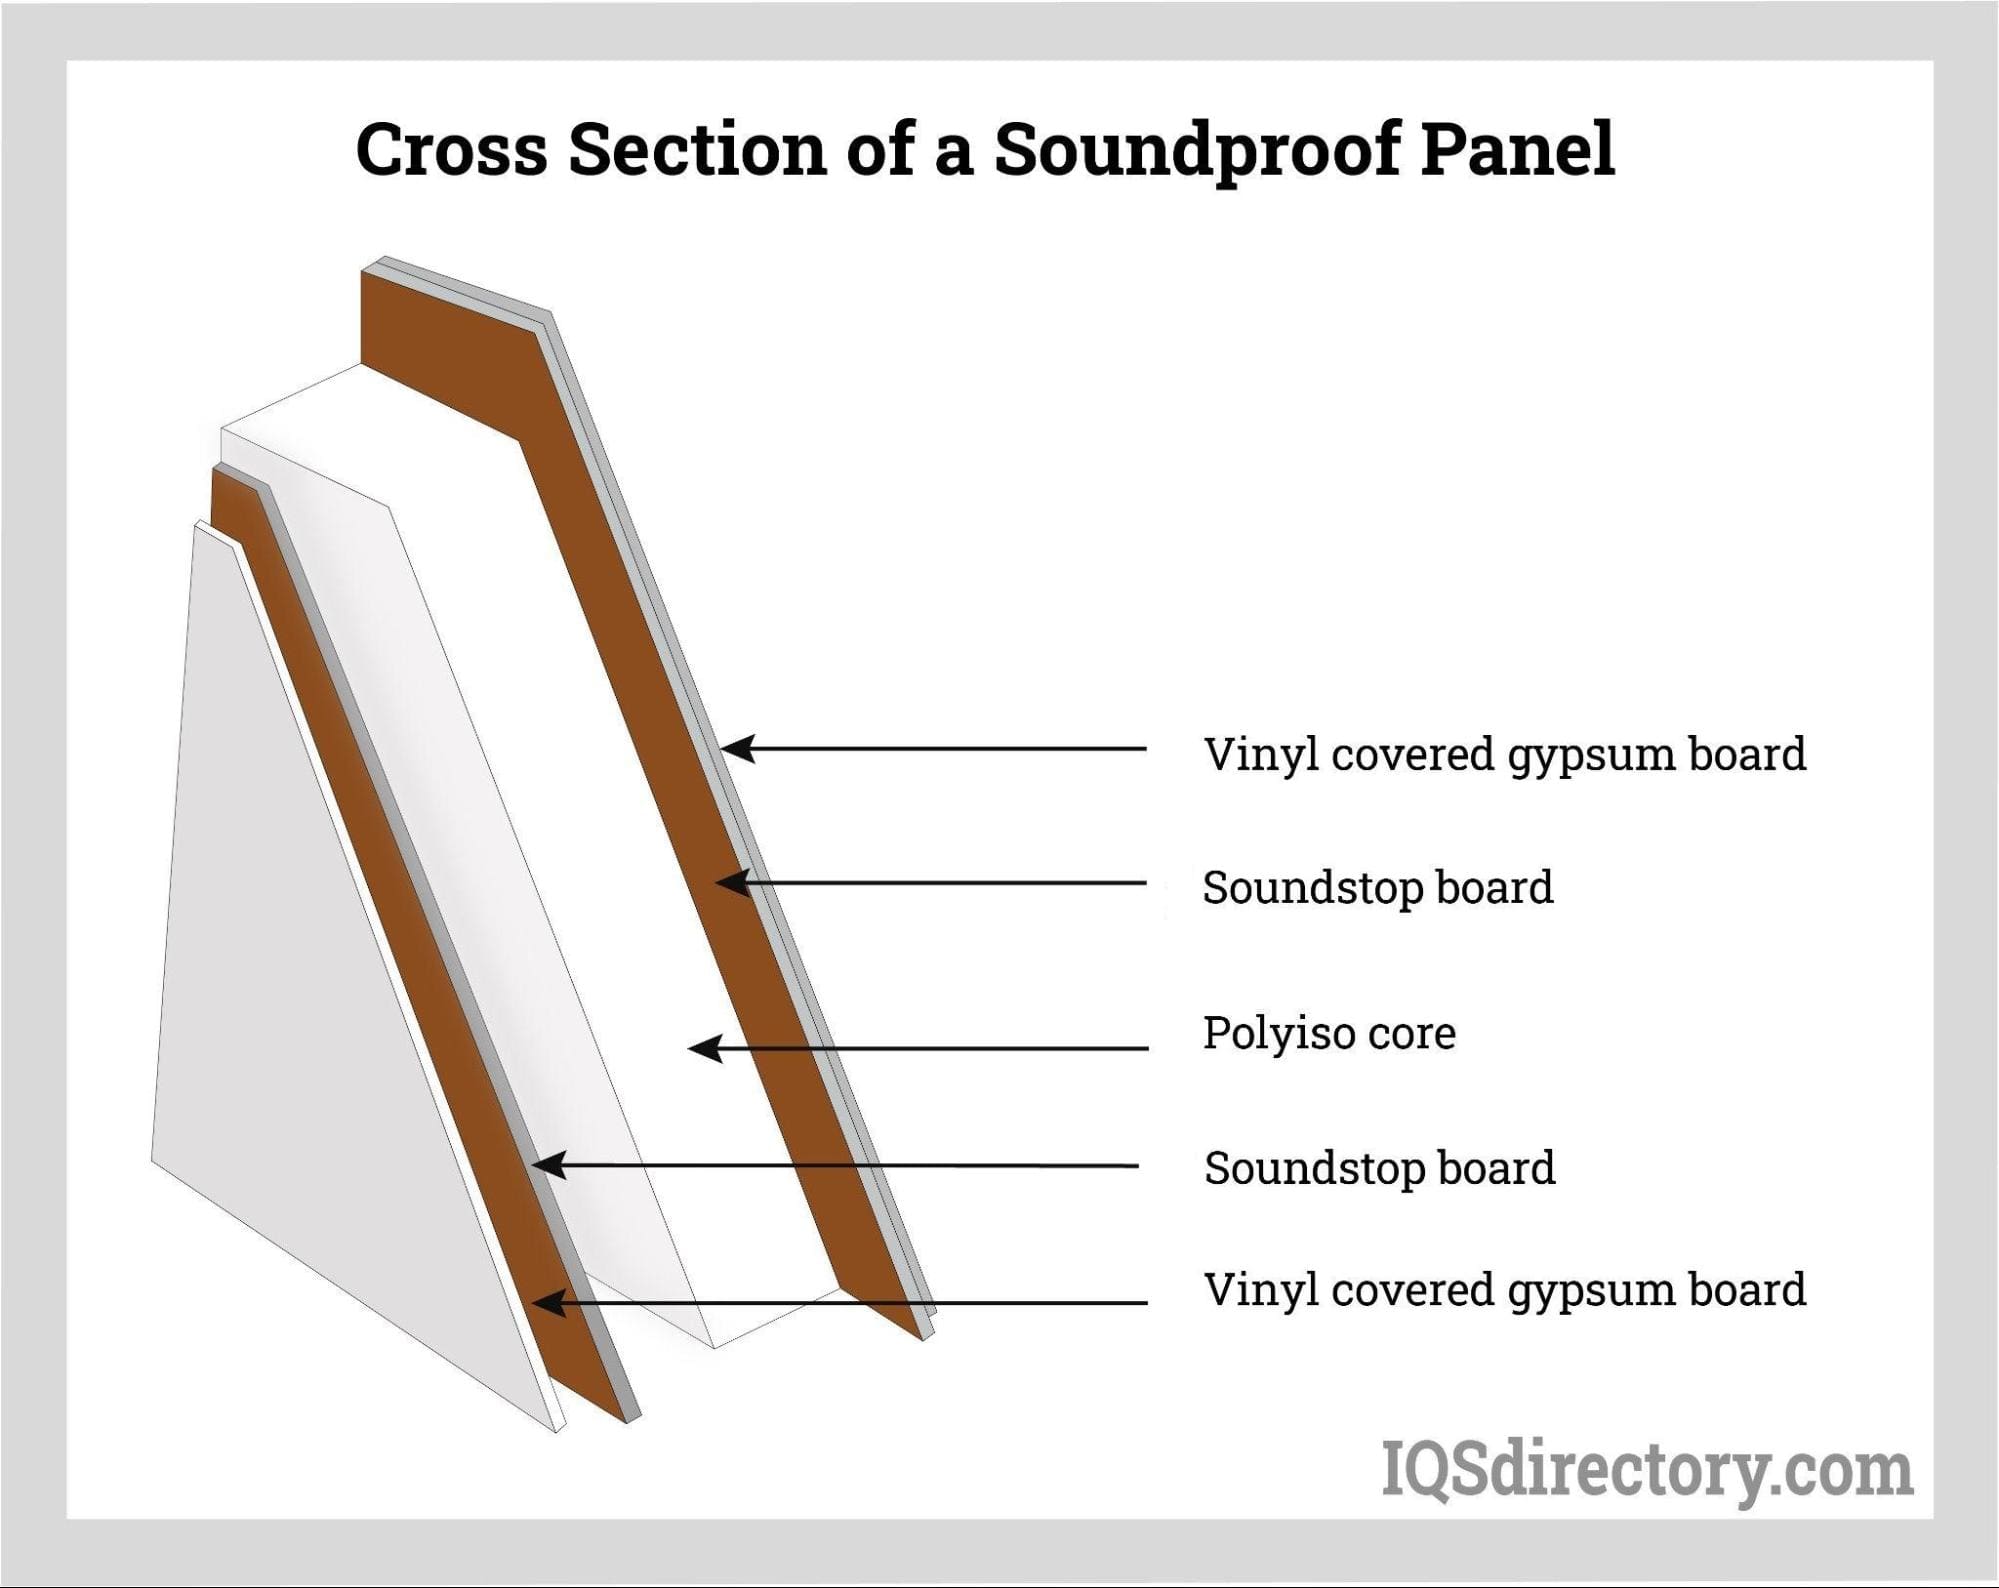 Cross Section of a Soundproof Panel